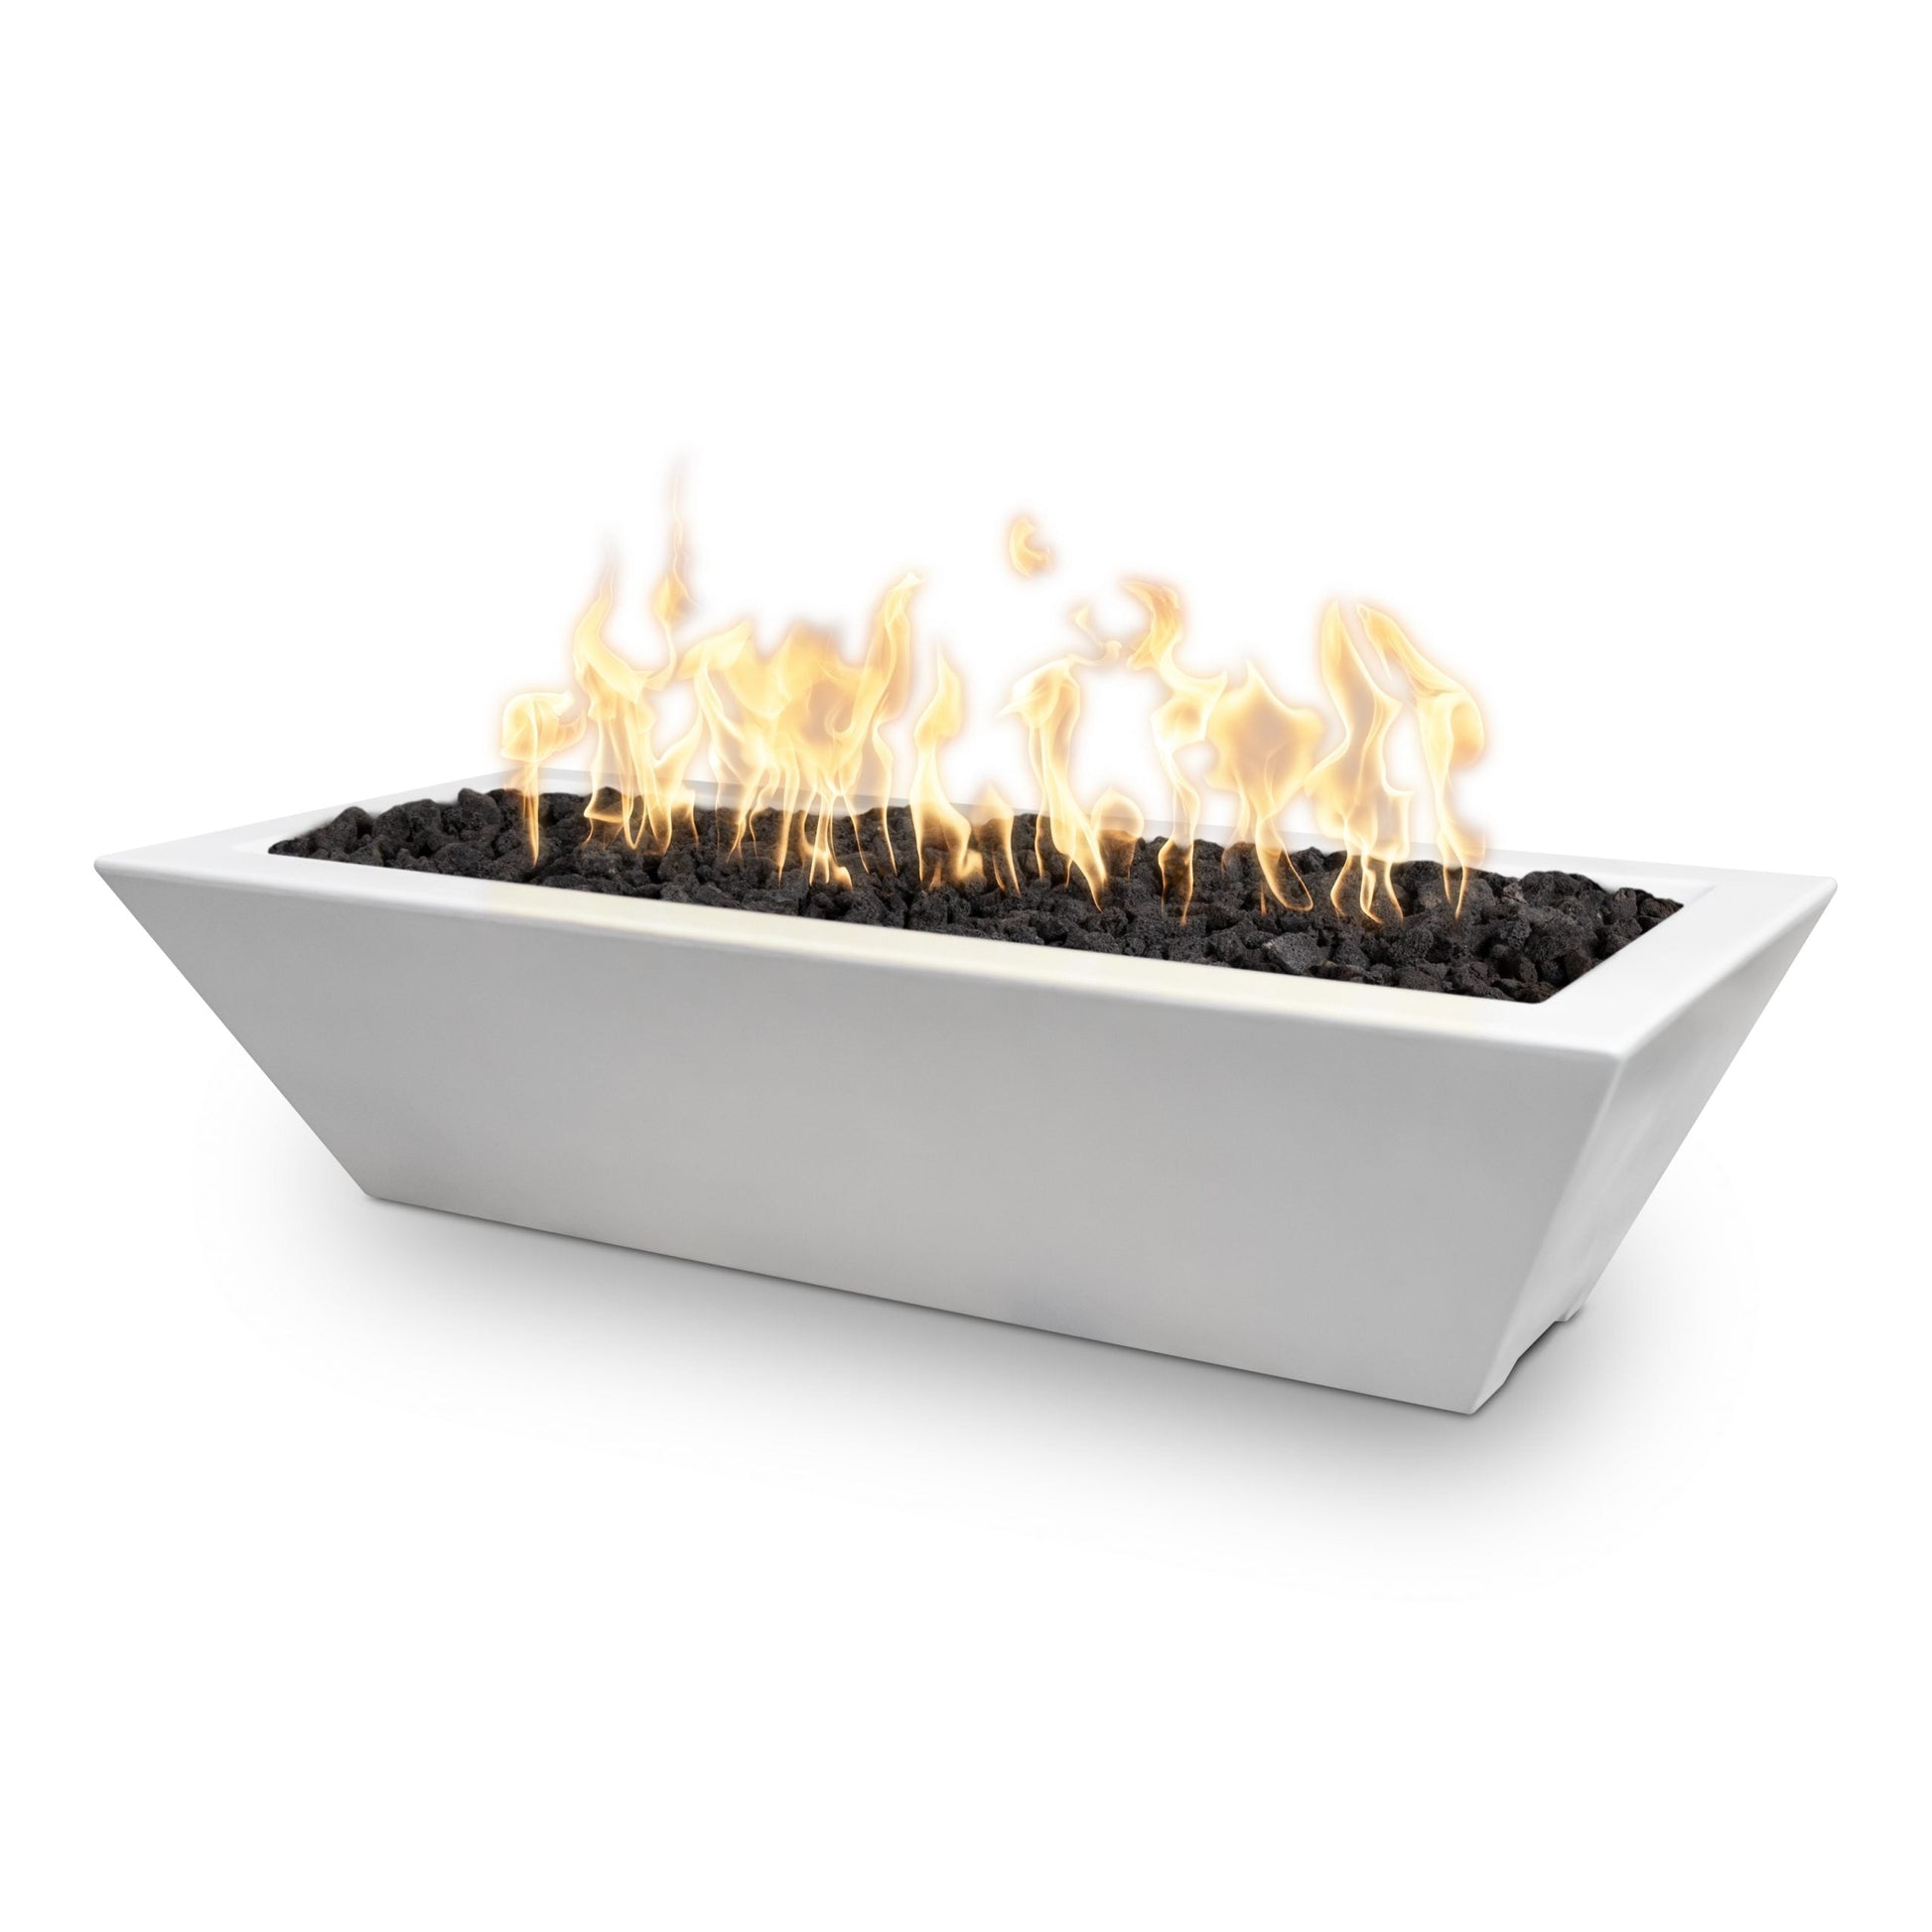 The Outdoor Plus Linear Maya 72" Ash GFRC Concrete Liquid Propane Fire Bowl with 12V Electronic Ignition